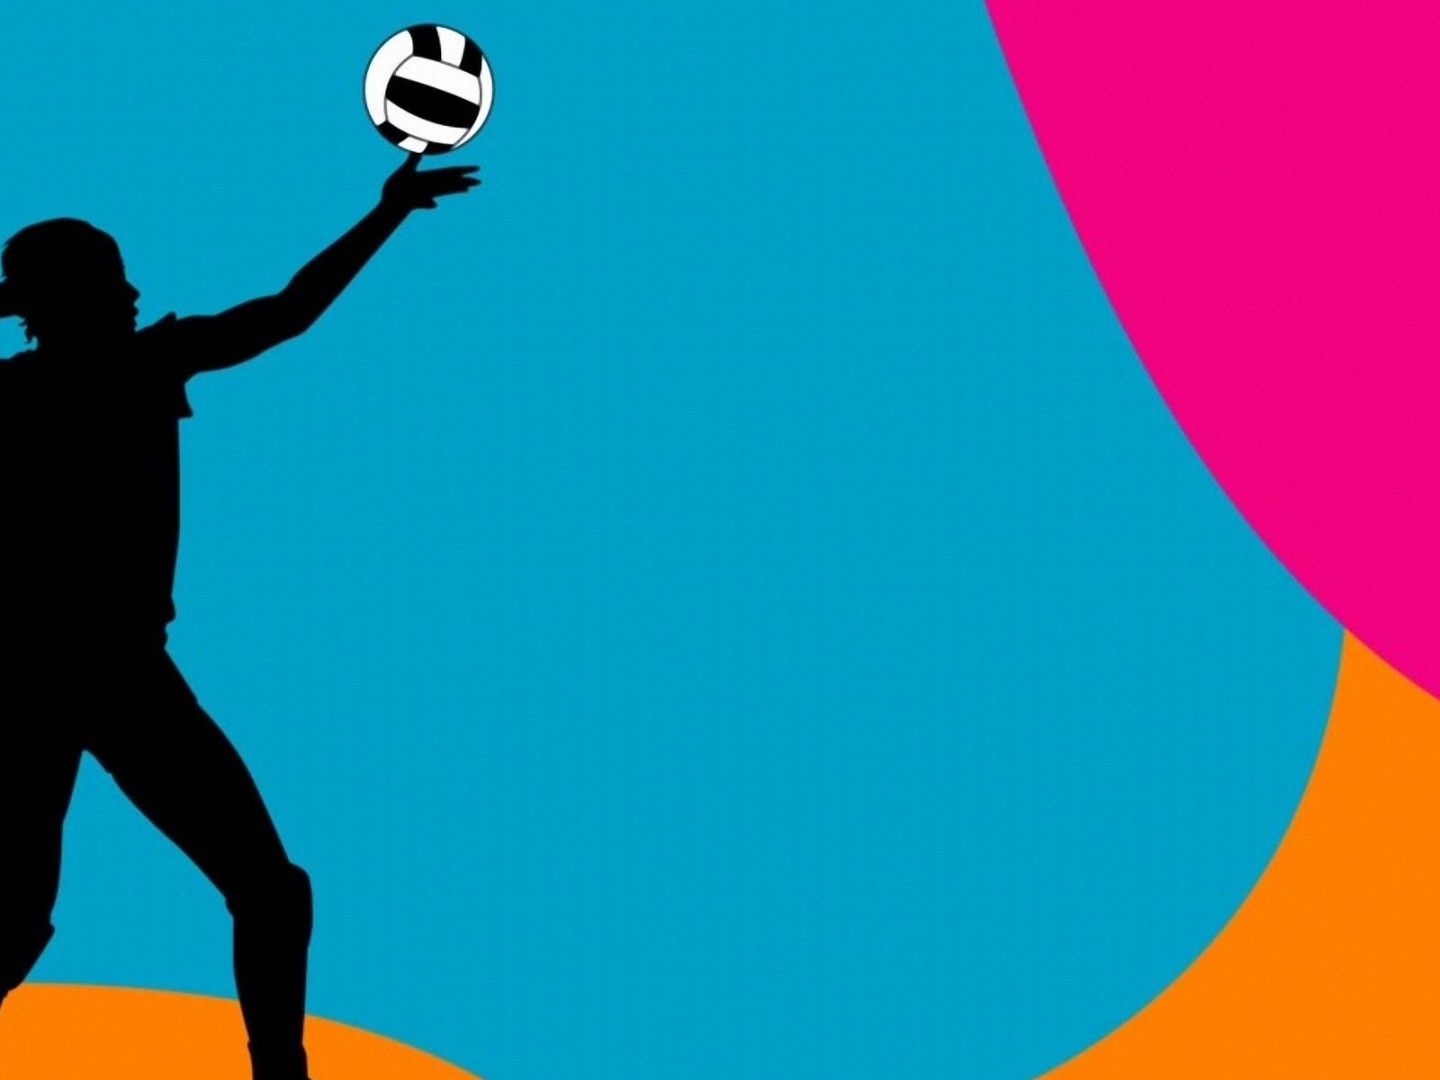 Free download Colorful Volleyball Backgrounds images [1440x1080] for your  Desktop, Mobile & Tablet | Explore 75+ Volleyball Backgrounds | Volleyball  Wallpapers, Volleyball Wallpaper Design, Free Volleyball Wallpapers and  Backgrounds